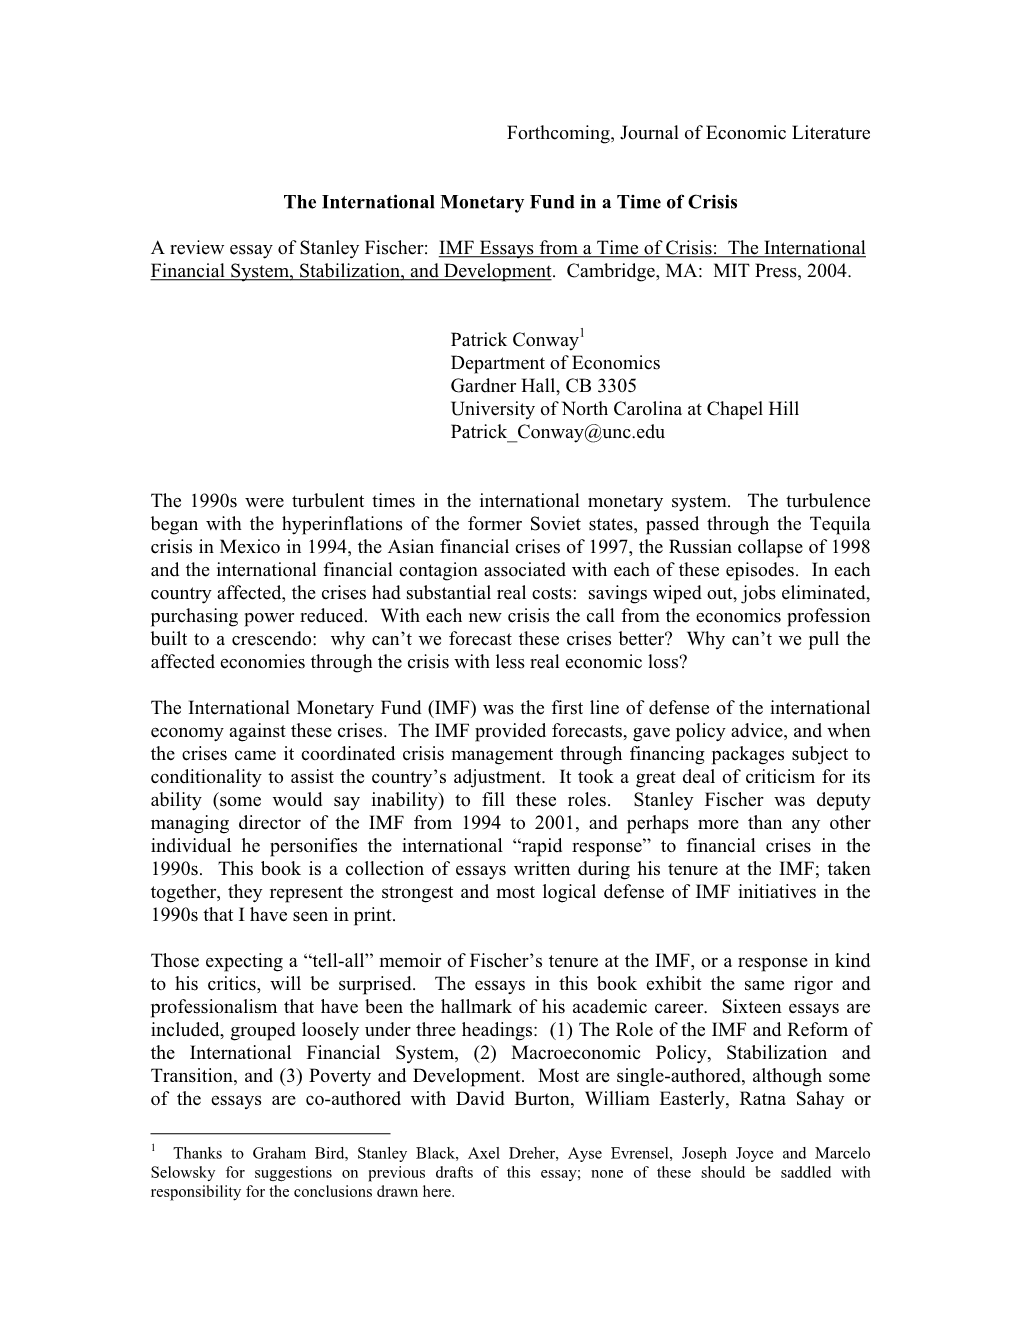 International Monetary Fund in a Time of Crisis a Review Essay